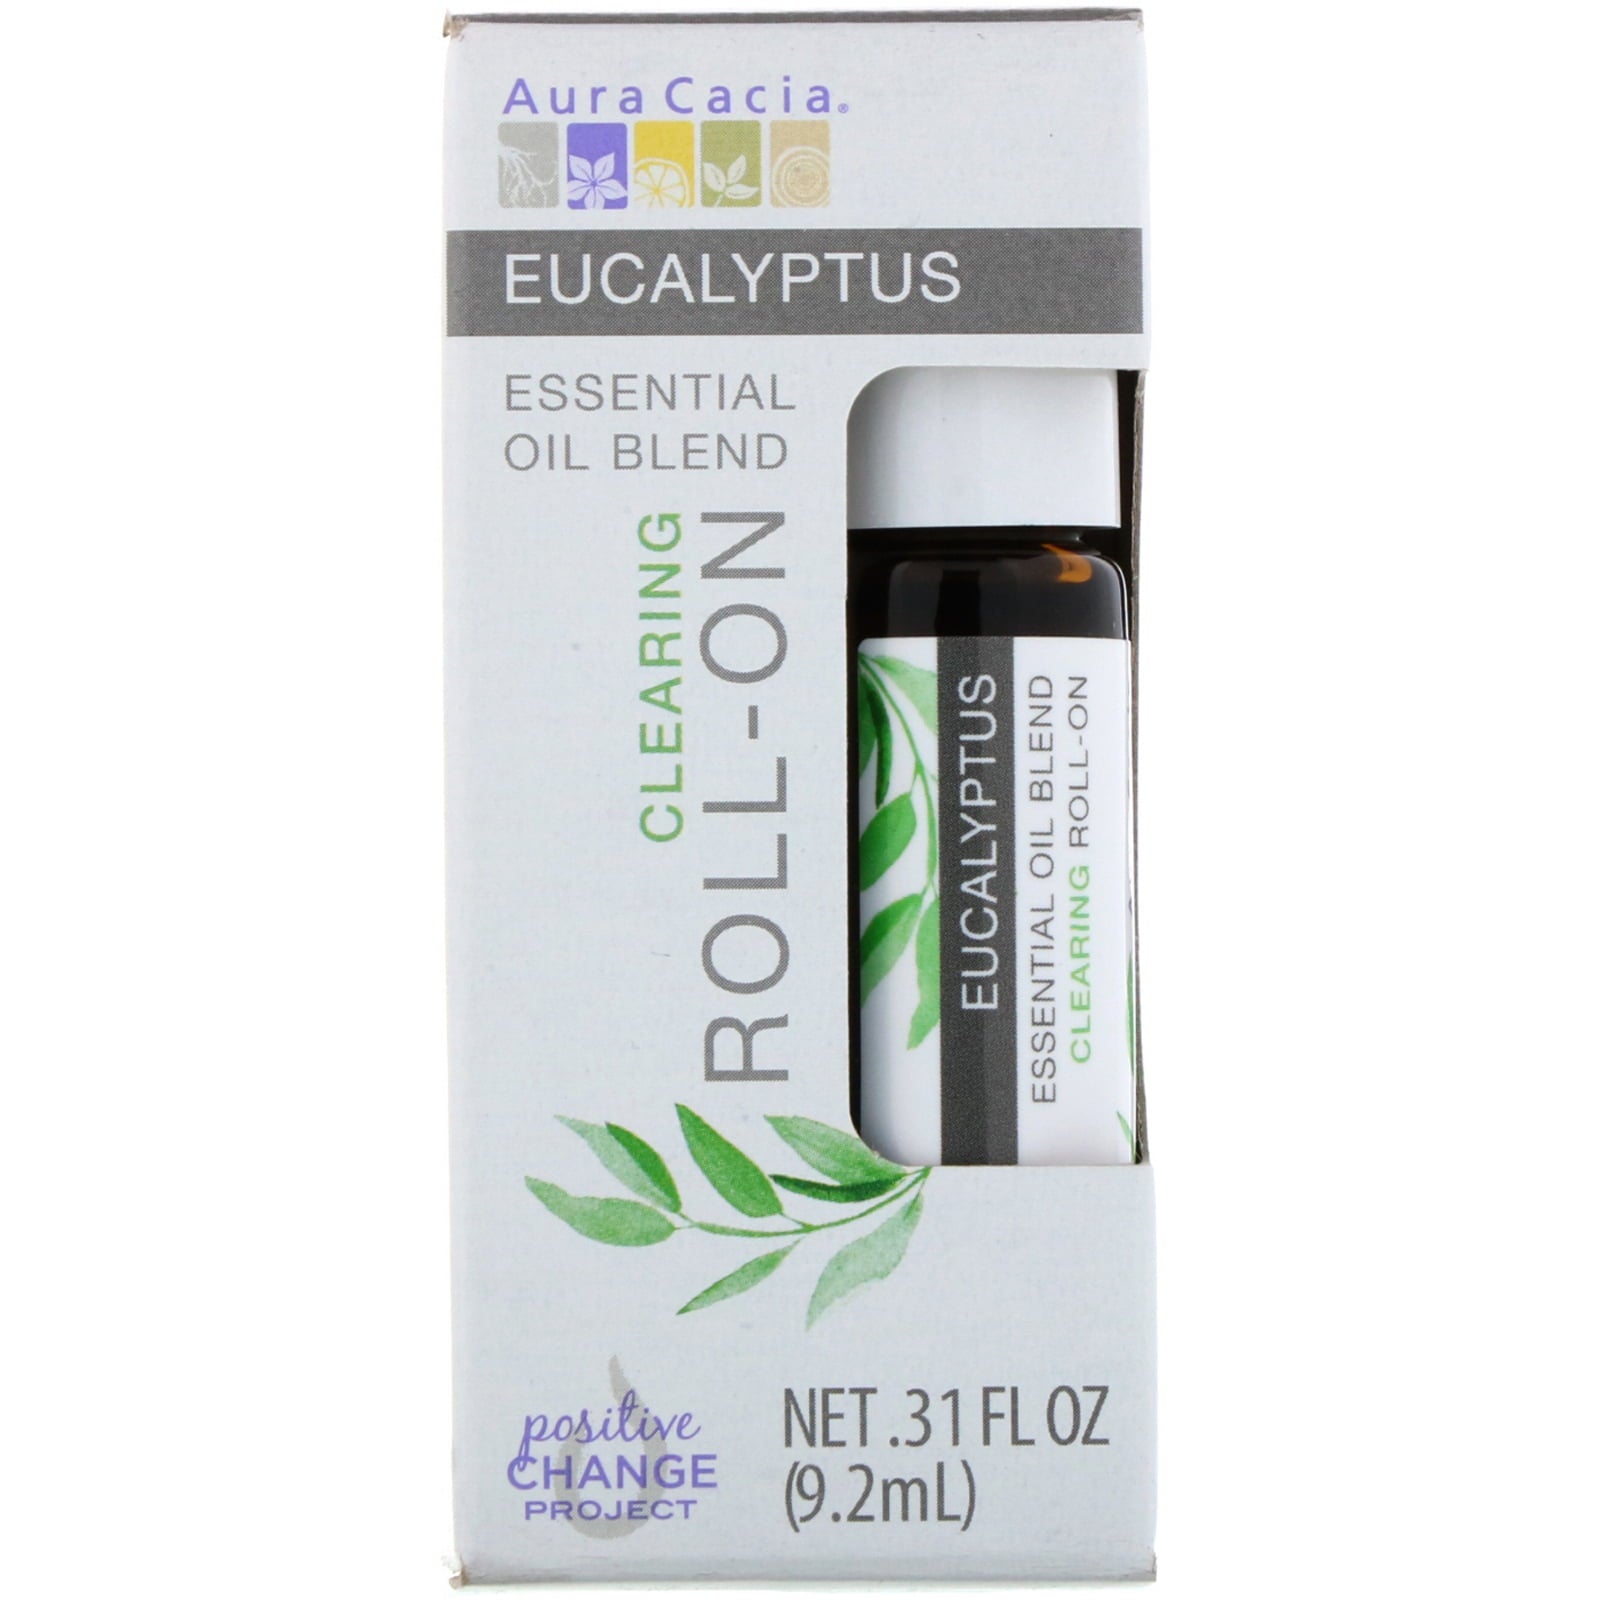 Aura Cacia Essential Oil Blend Clearing Roll-On Eucalyptus 31 oz Bottle